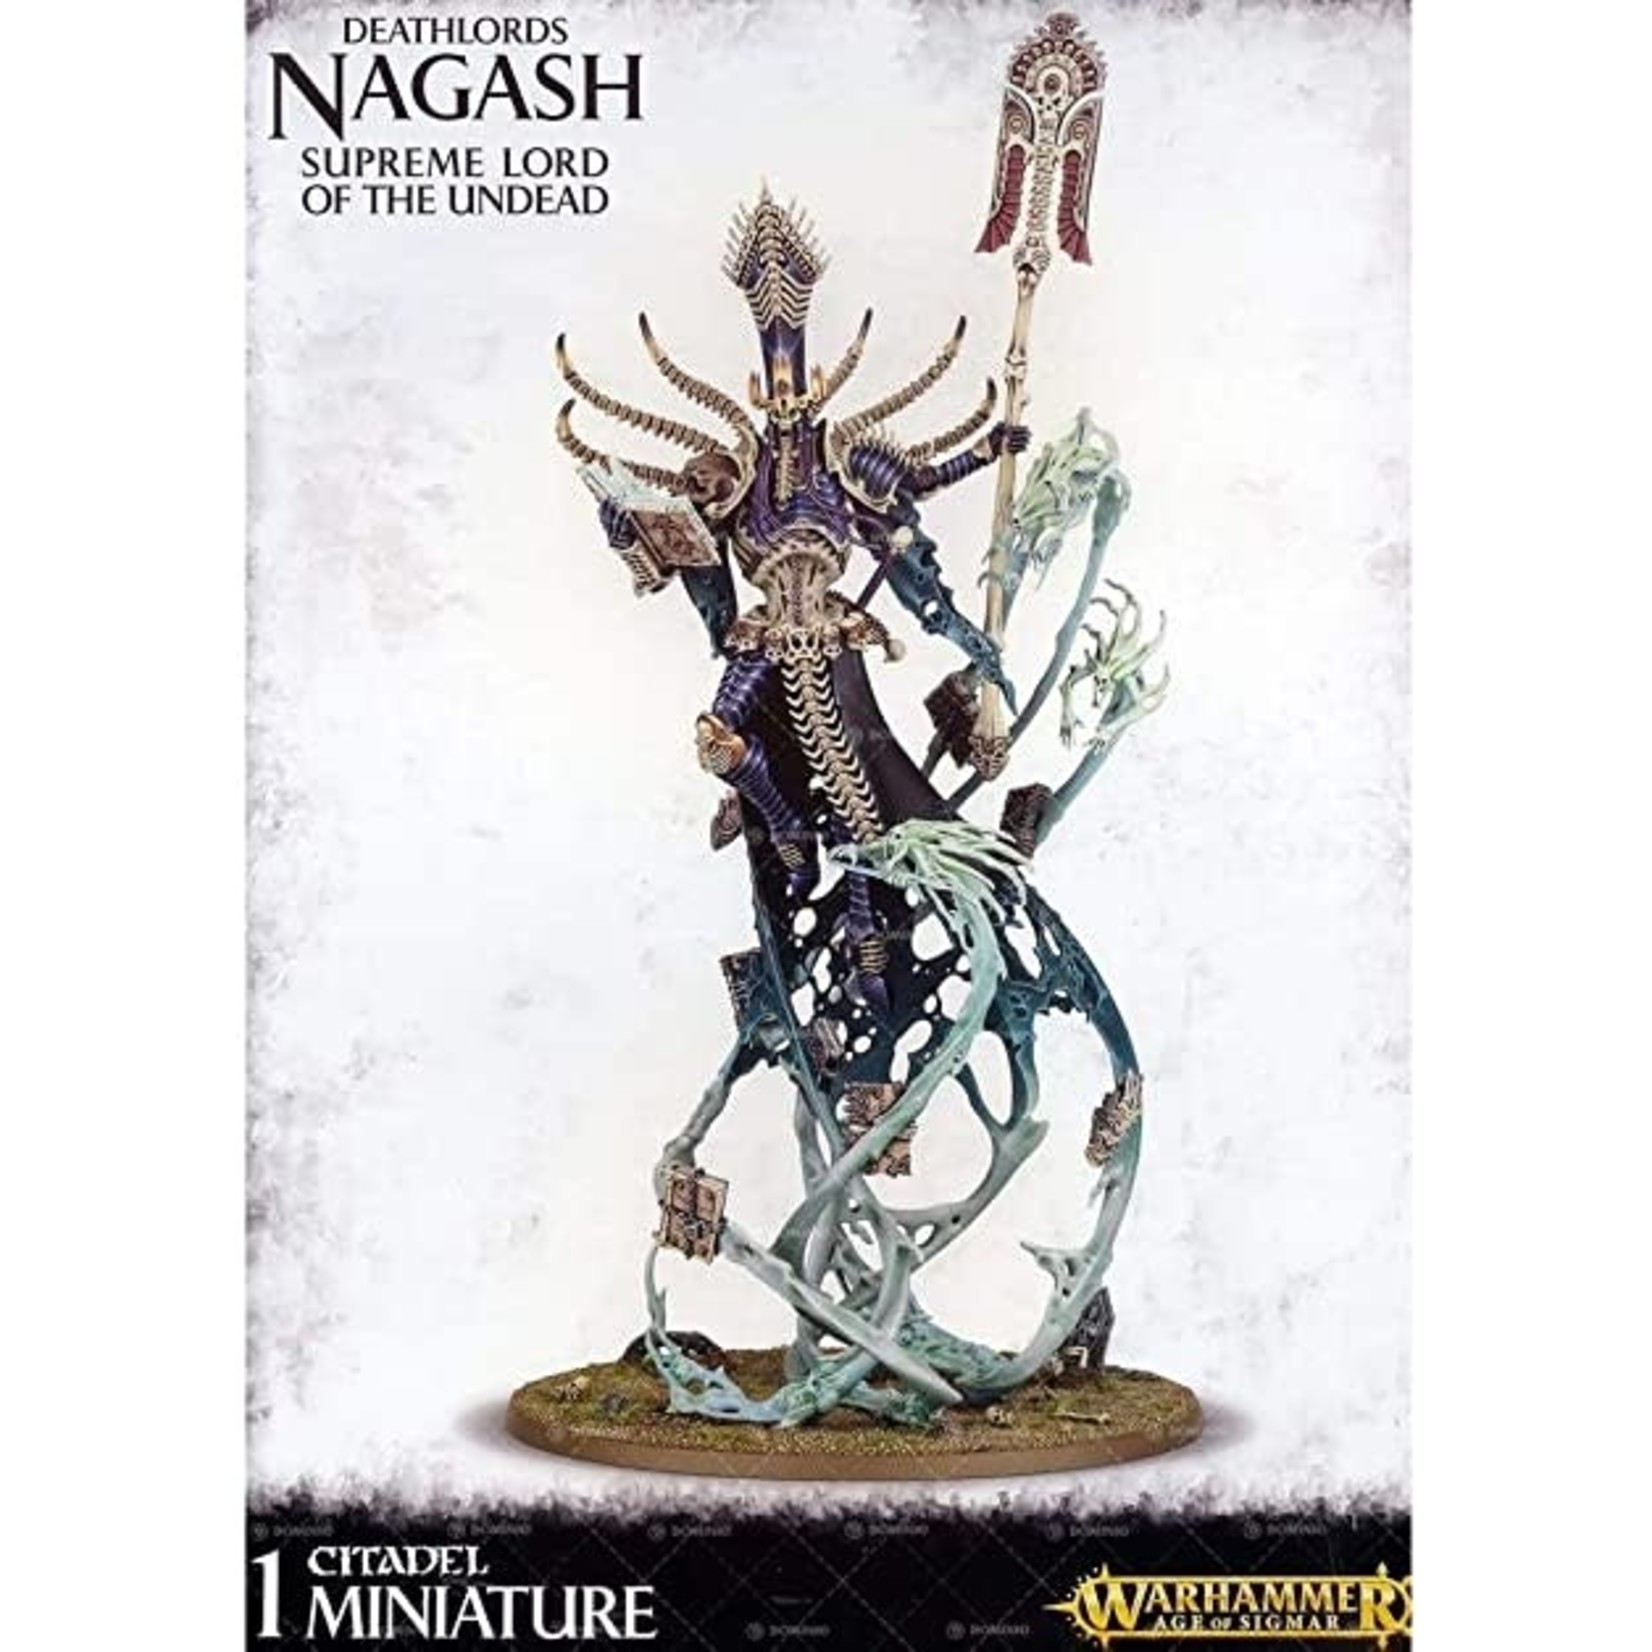 Nagash Supreme Lord of the Undead (40K)